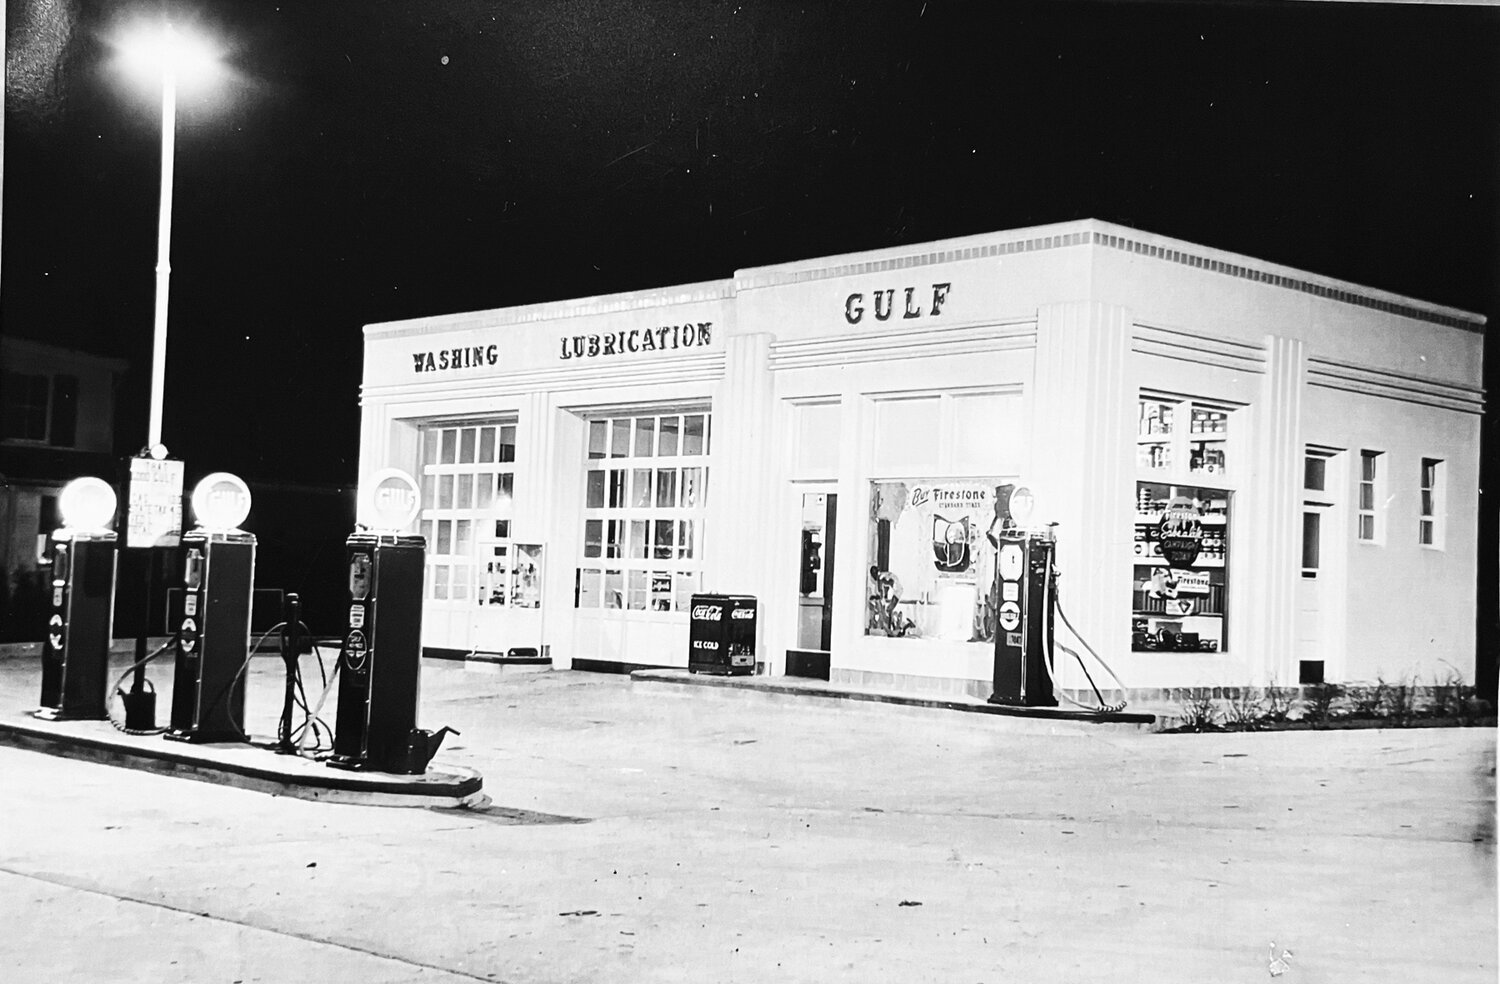 After the Five Points Hotel structure was torn down in 1930, a Gulf gasoline station, operated by Horace Overholt, took its place at the prominent Doylestown intersection.